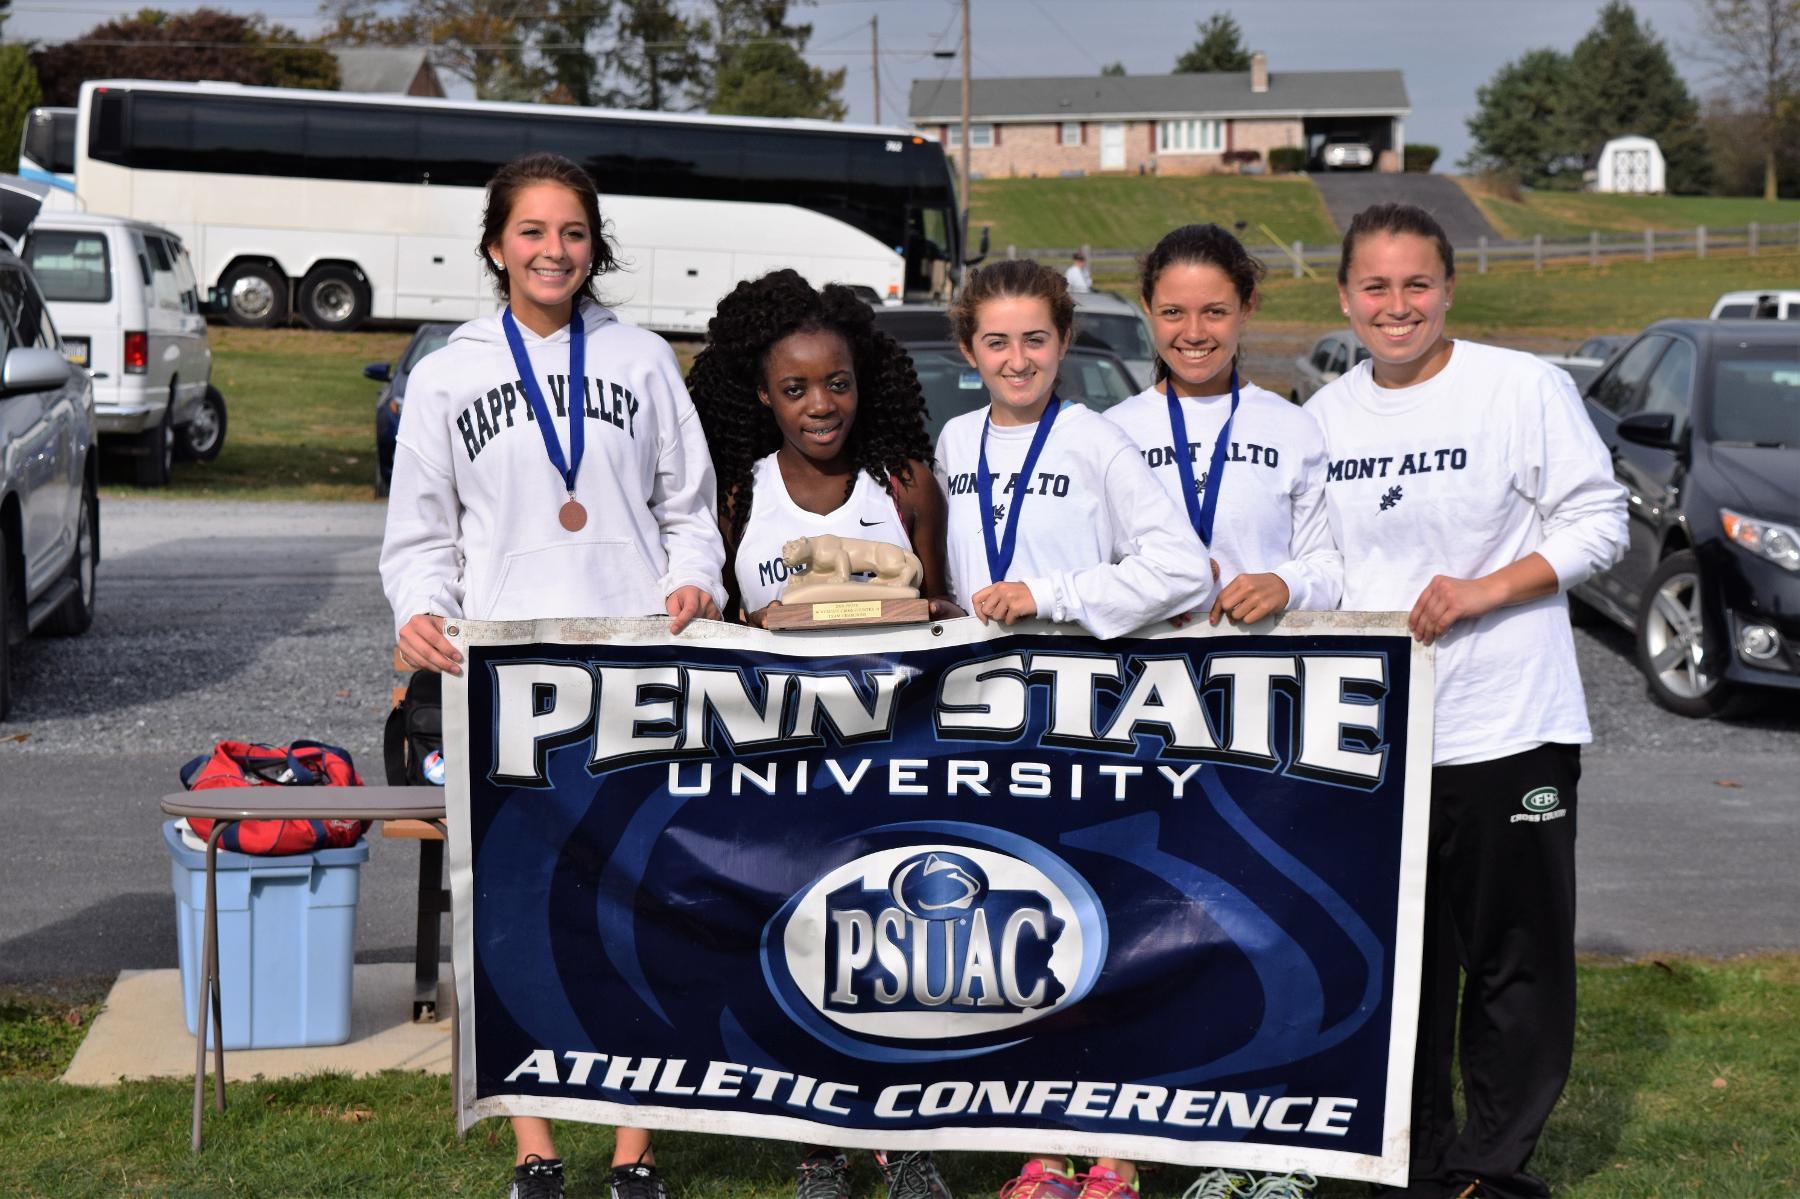 PSUAC 2016 Cross Country Championship: October 29th at Mont Alto